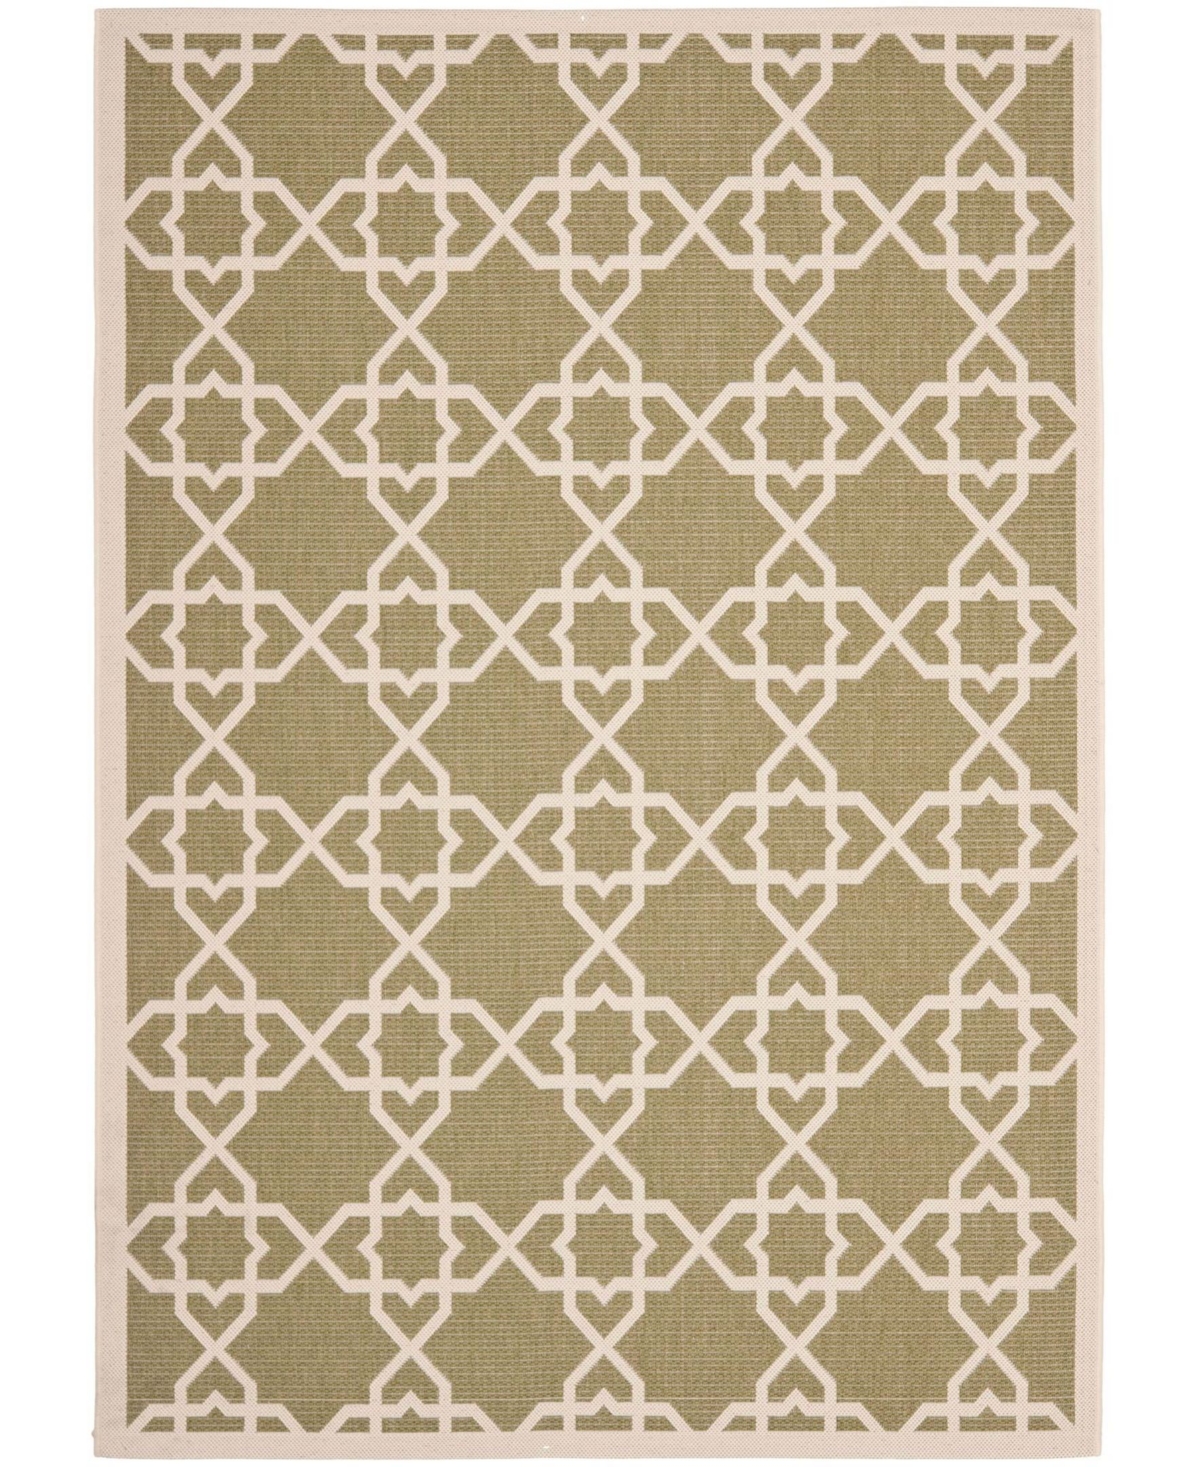 Safavieh Courtyard Cy6032 Green And Beige 5'3" X 7'7" Outdoor Area Rug